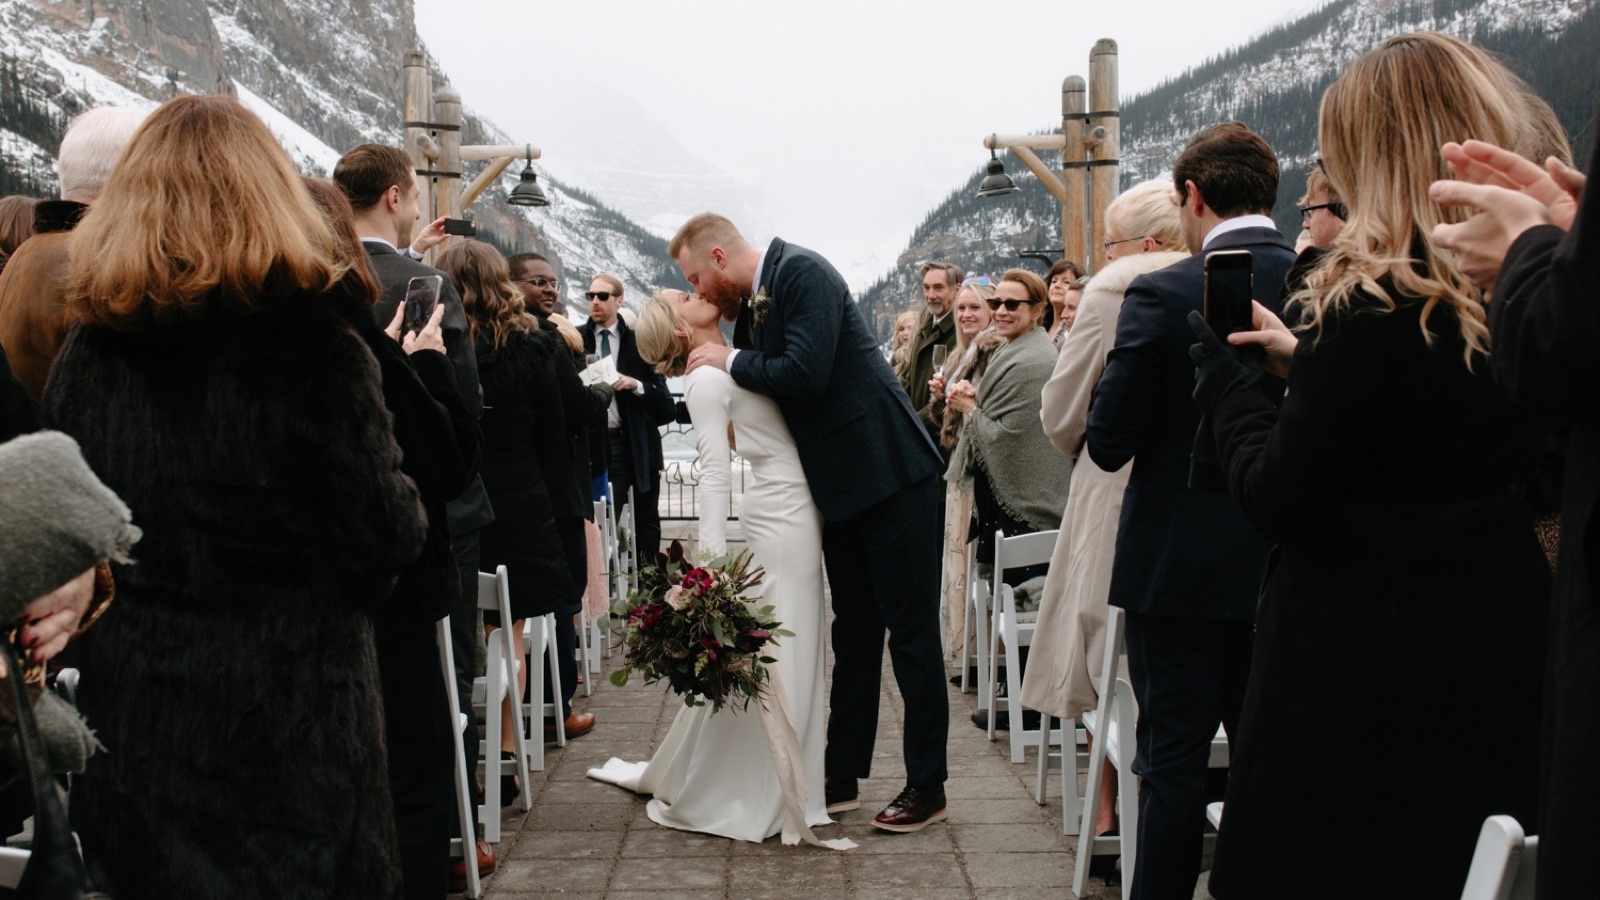 Kiss mid-aisle during a wedding couple's recessional at their outdoor winter ceremony at Lake Louise